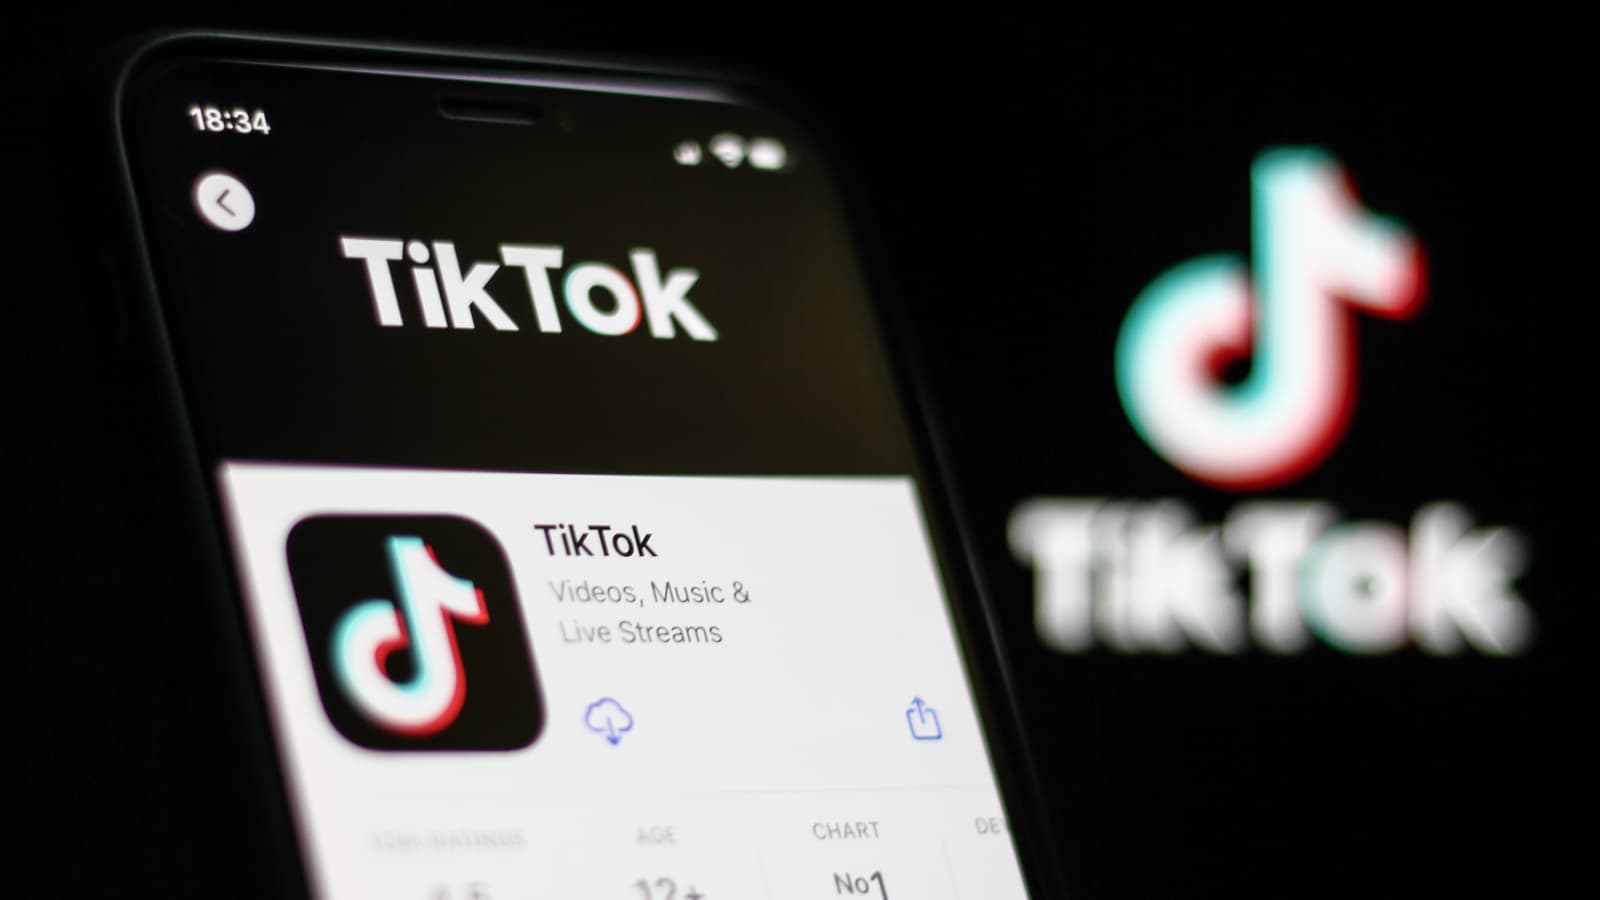 New York City bans TikTok on official devices